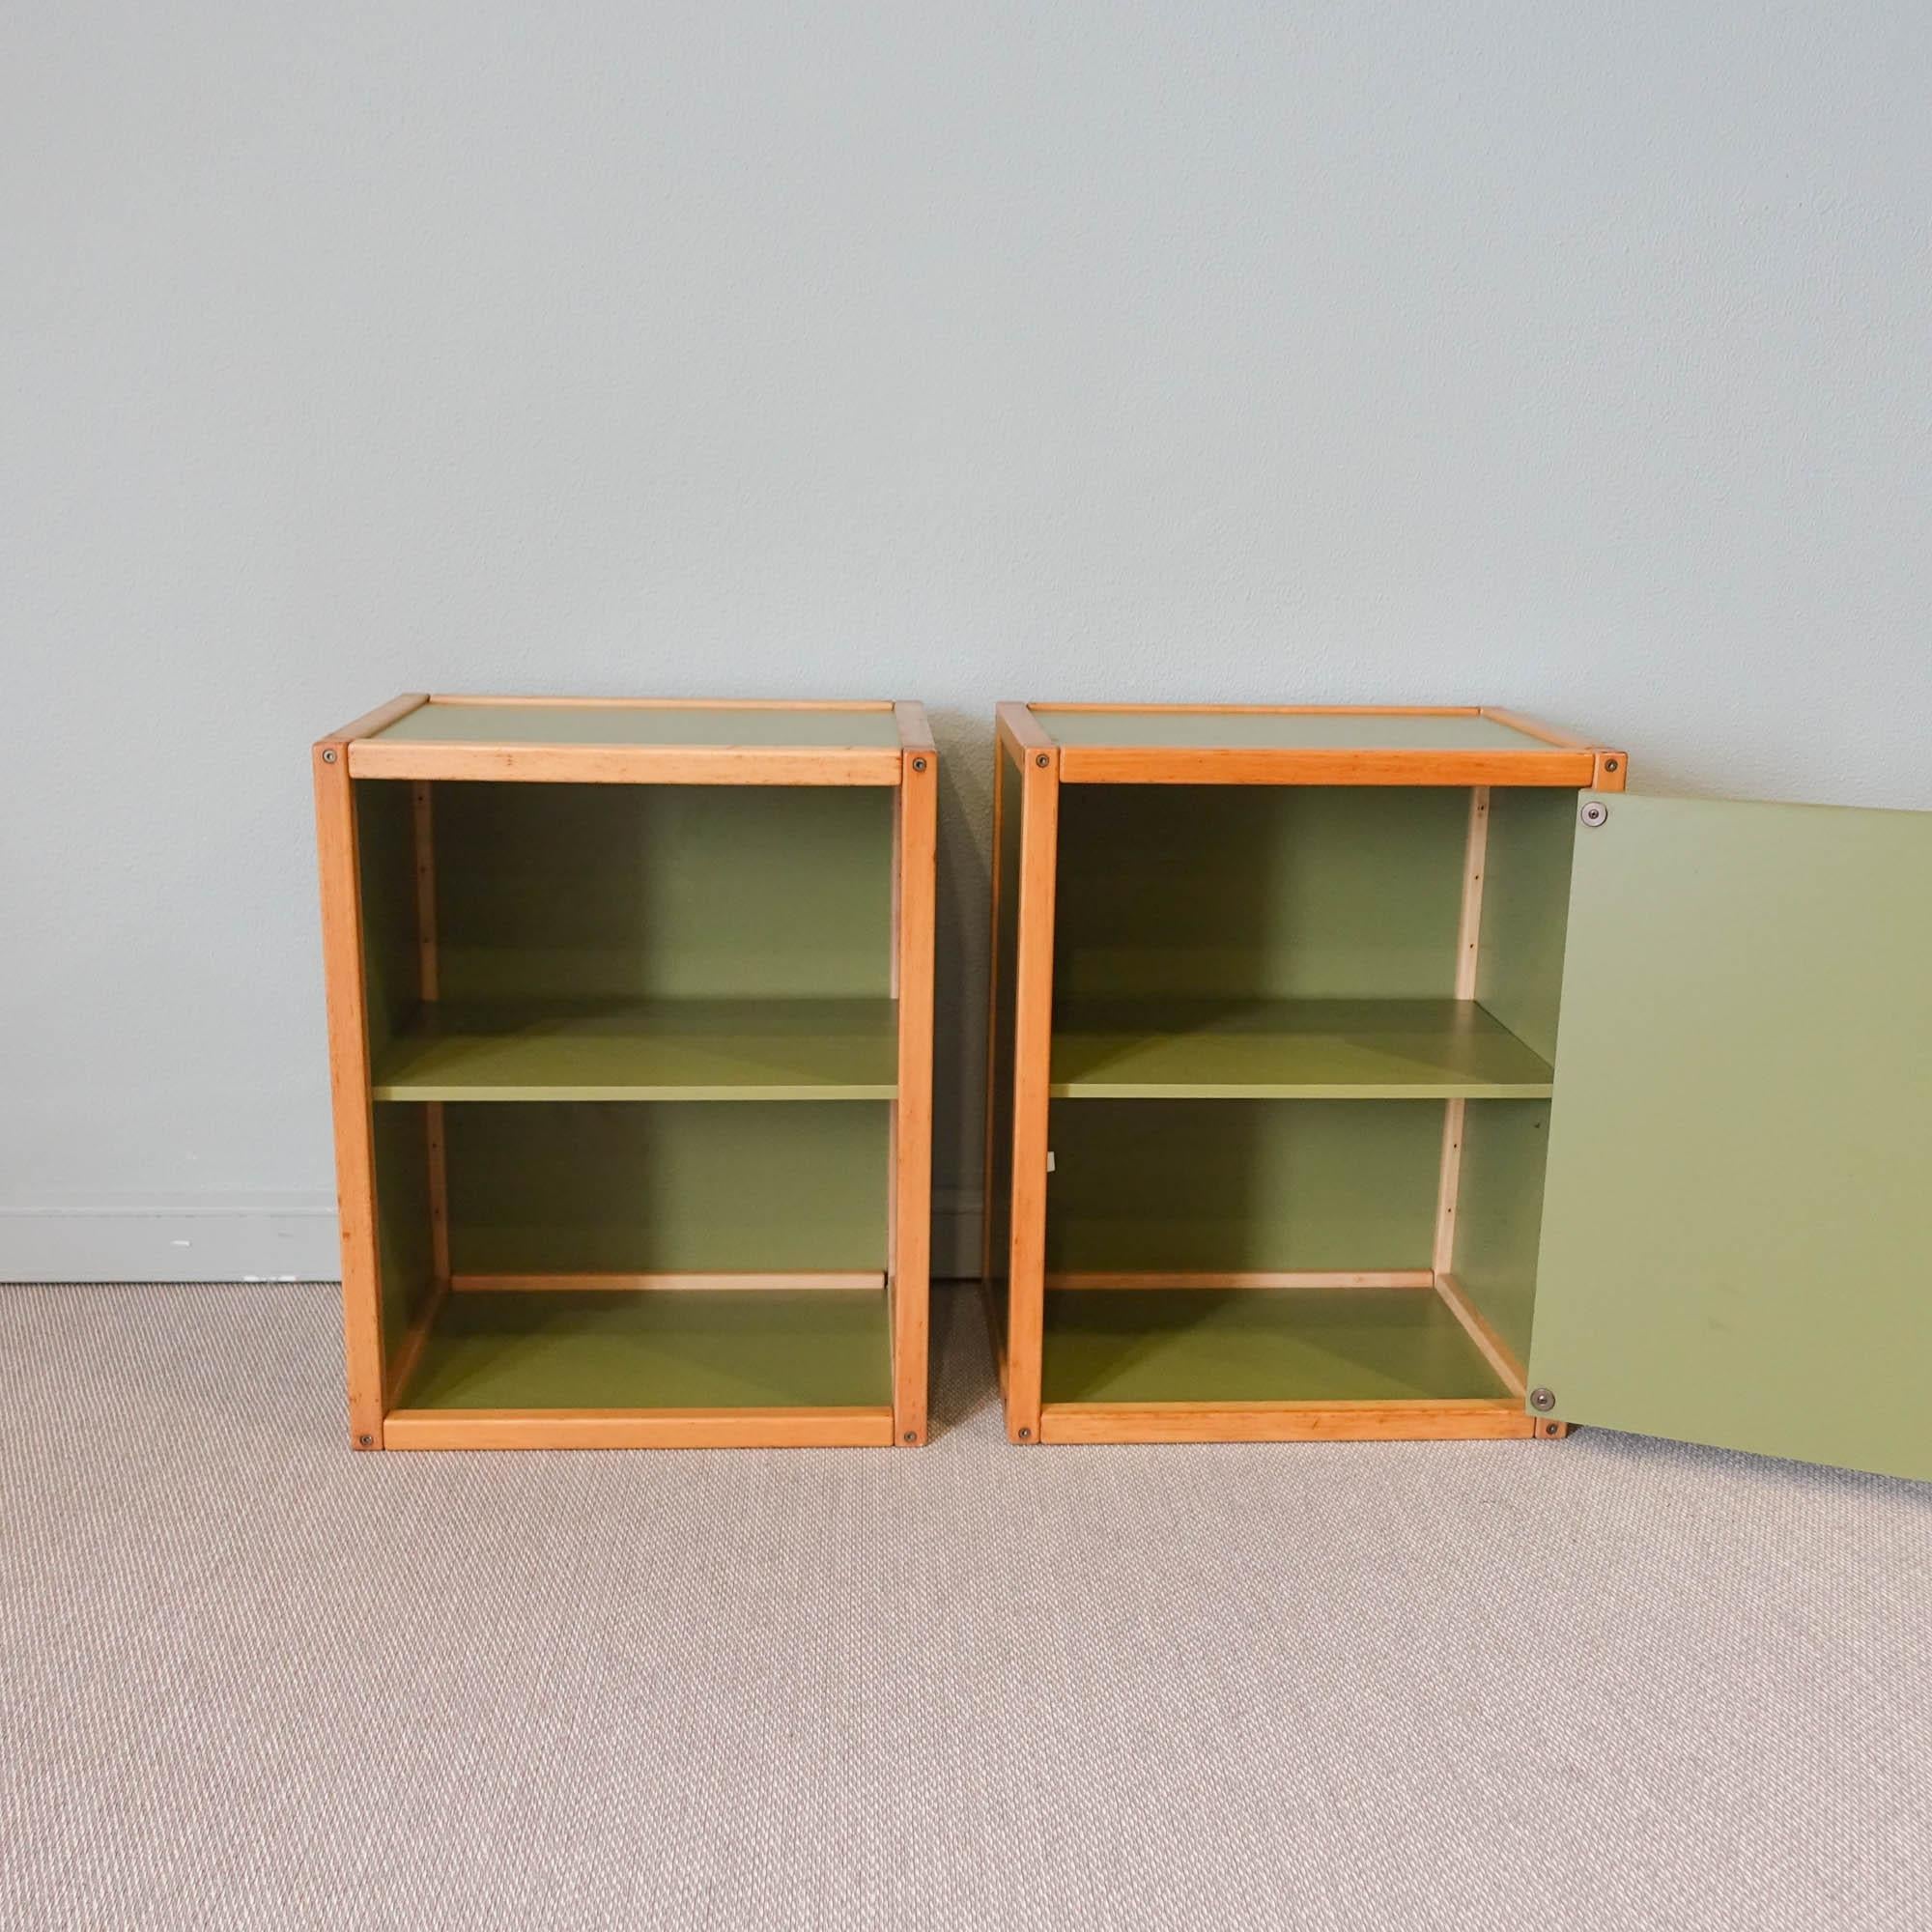 Pair of Vintage Profilsystem Collection Storage Units by Elmar Flötotto For Sale 1